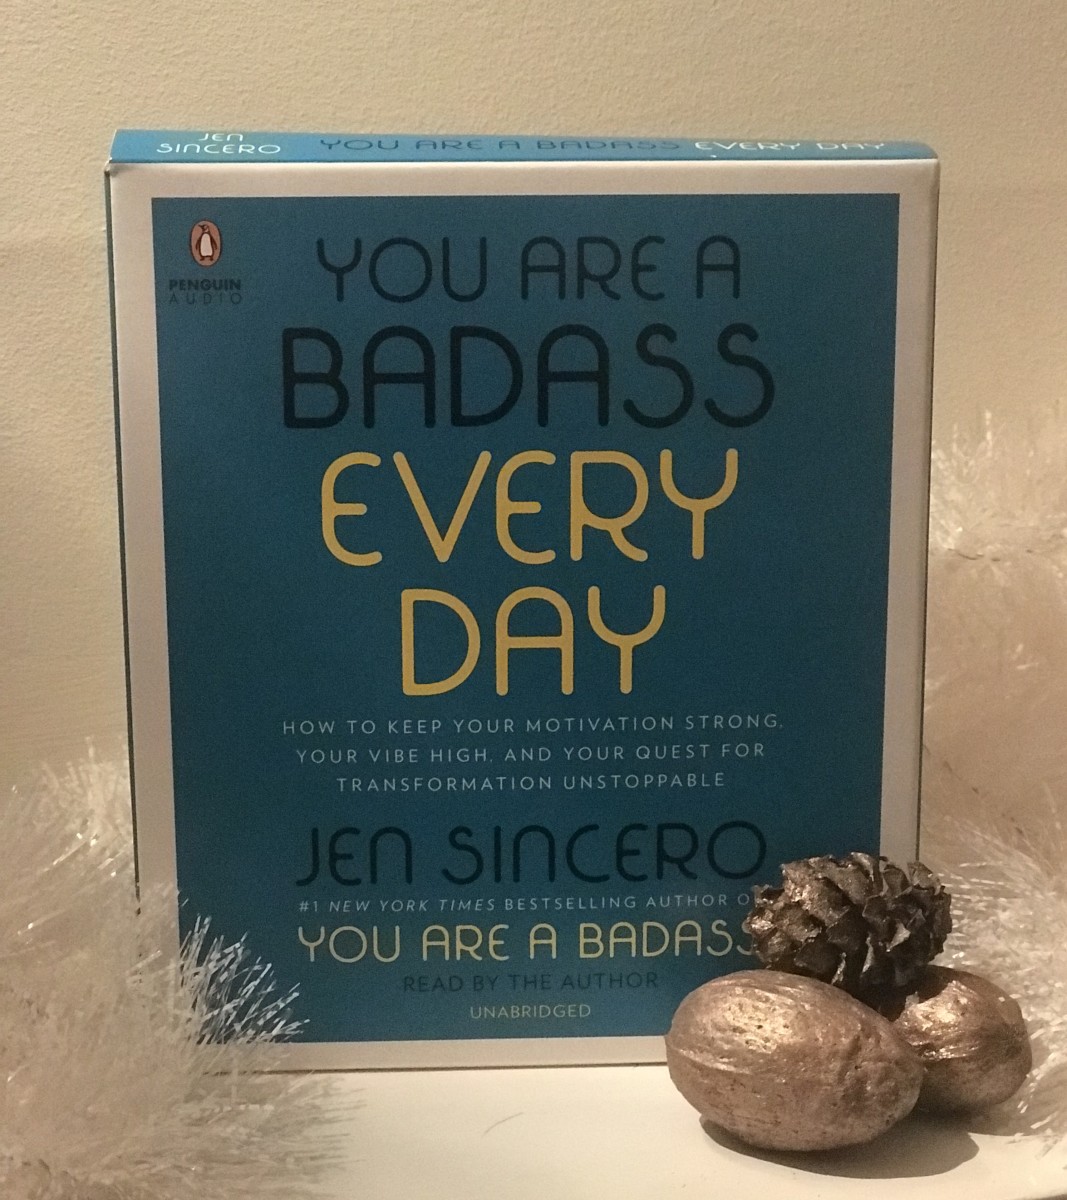                                                      You Are A Badass Every Day by Jen Sincero